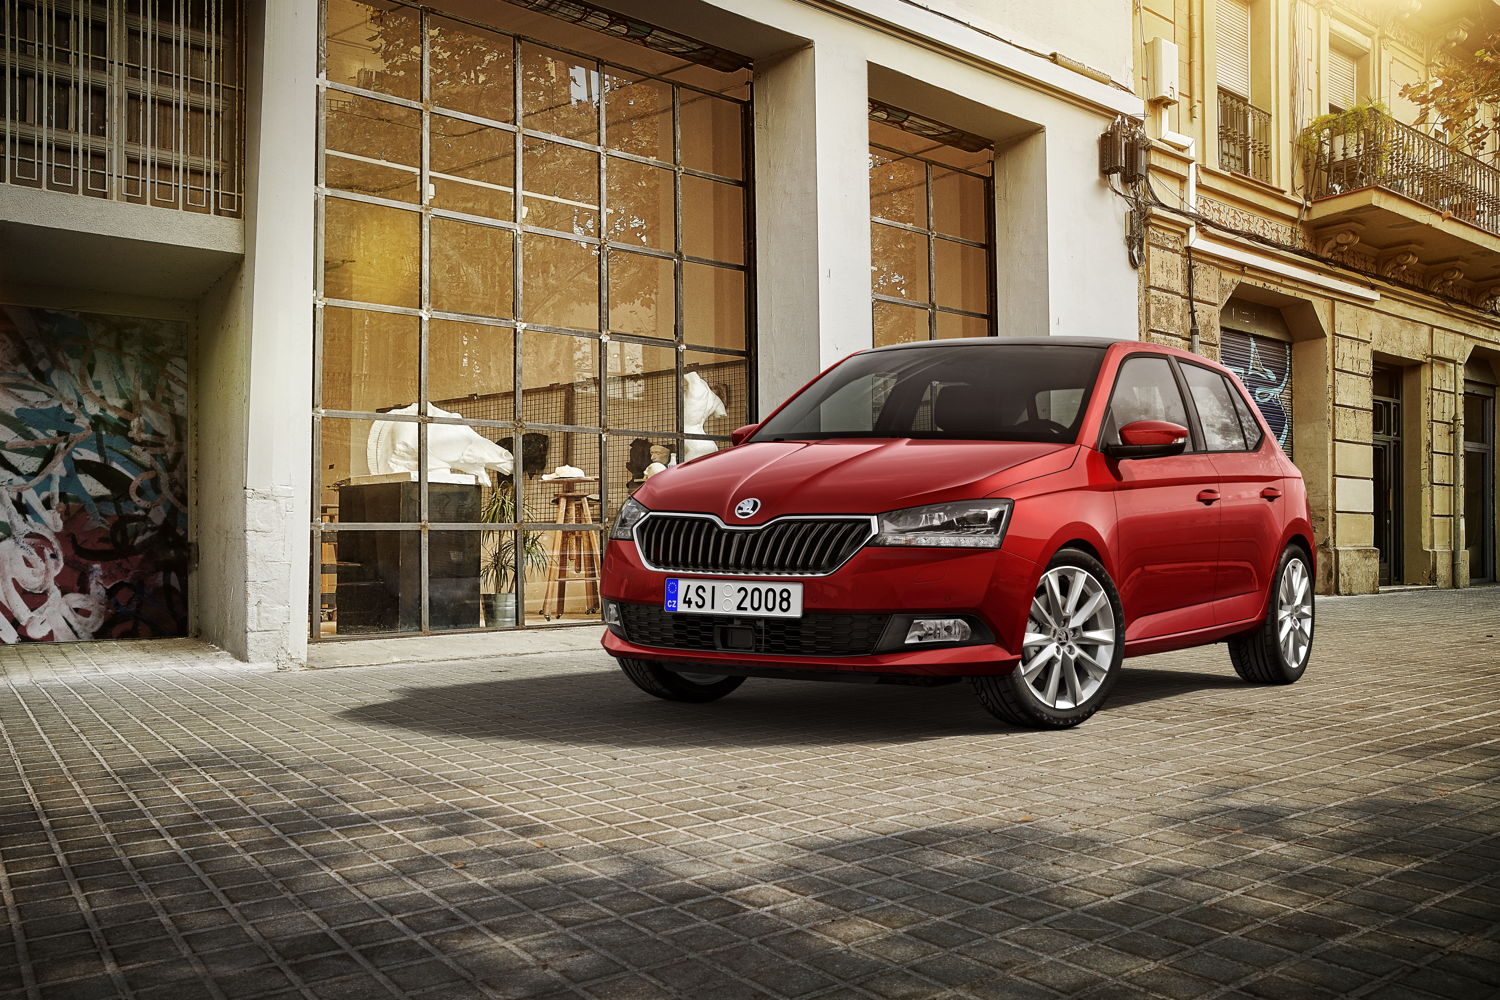 The ŠKODA FABIA is embarking on the next chapter of its success story with wide-ranging enhancements in terms of both design and technology. The popular small car made by the Czech carmaker will now boast even greater appeal thanks to restyled front and rear sections, the introduction of LED head and rear lights, as well as a refined interior.